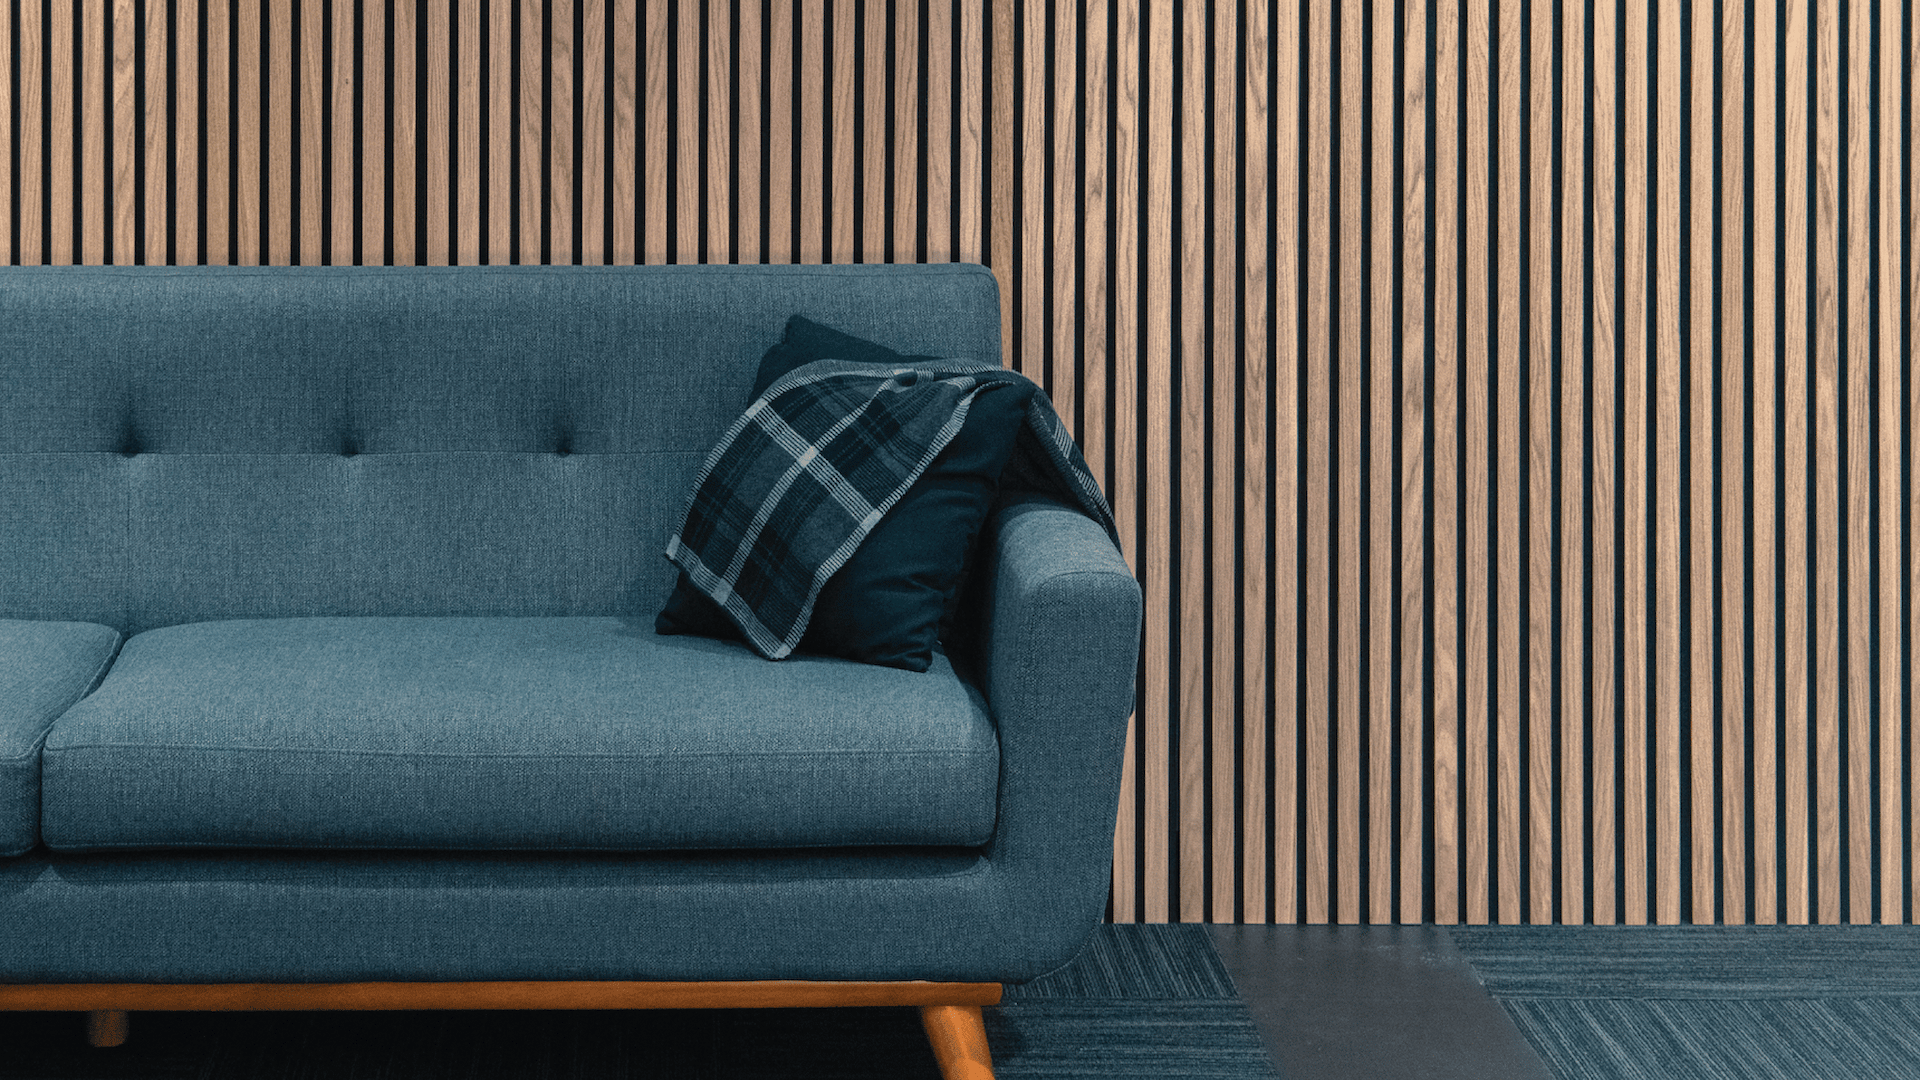 Acoustic wood slat panels behind a grey couch in an office